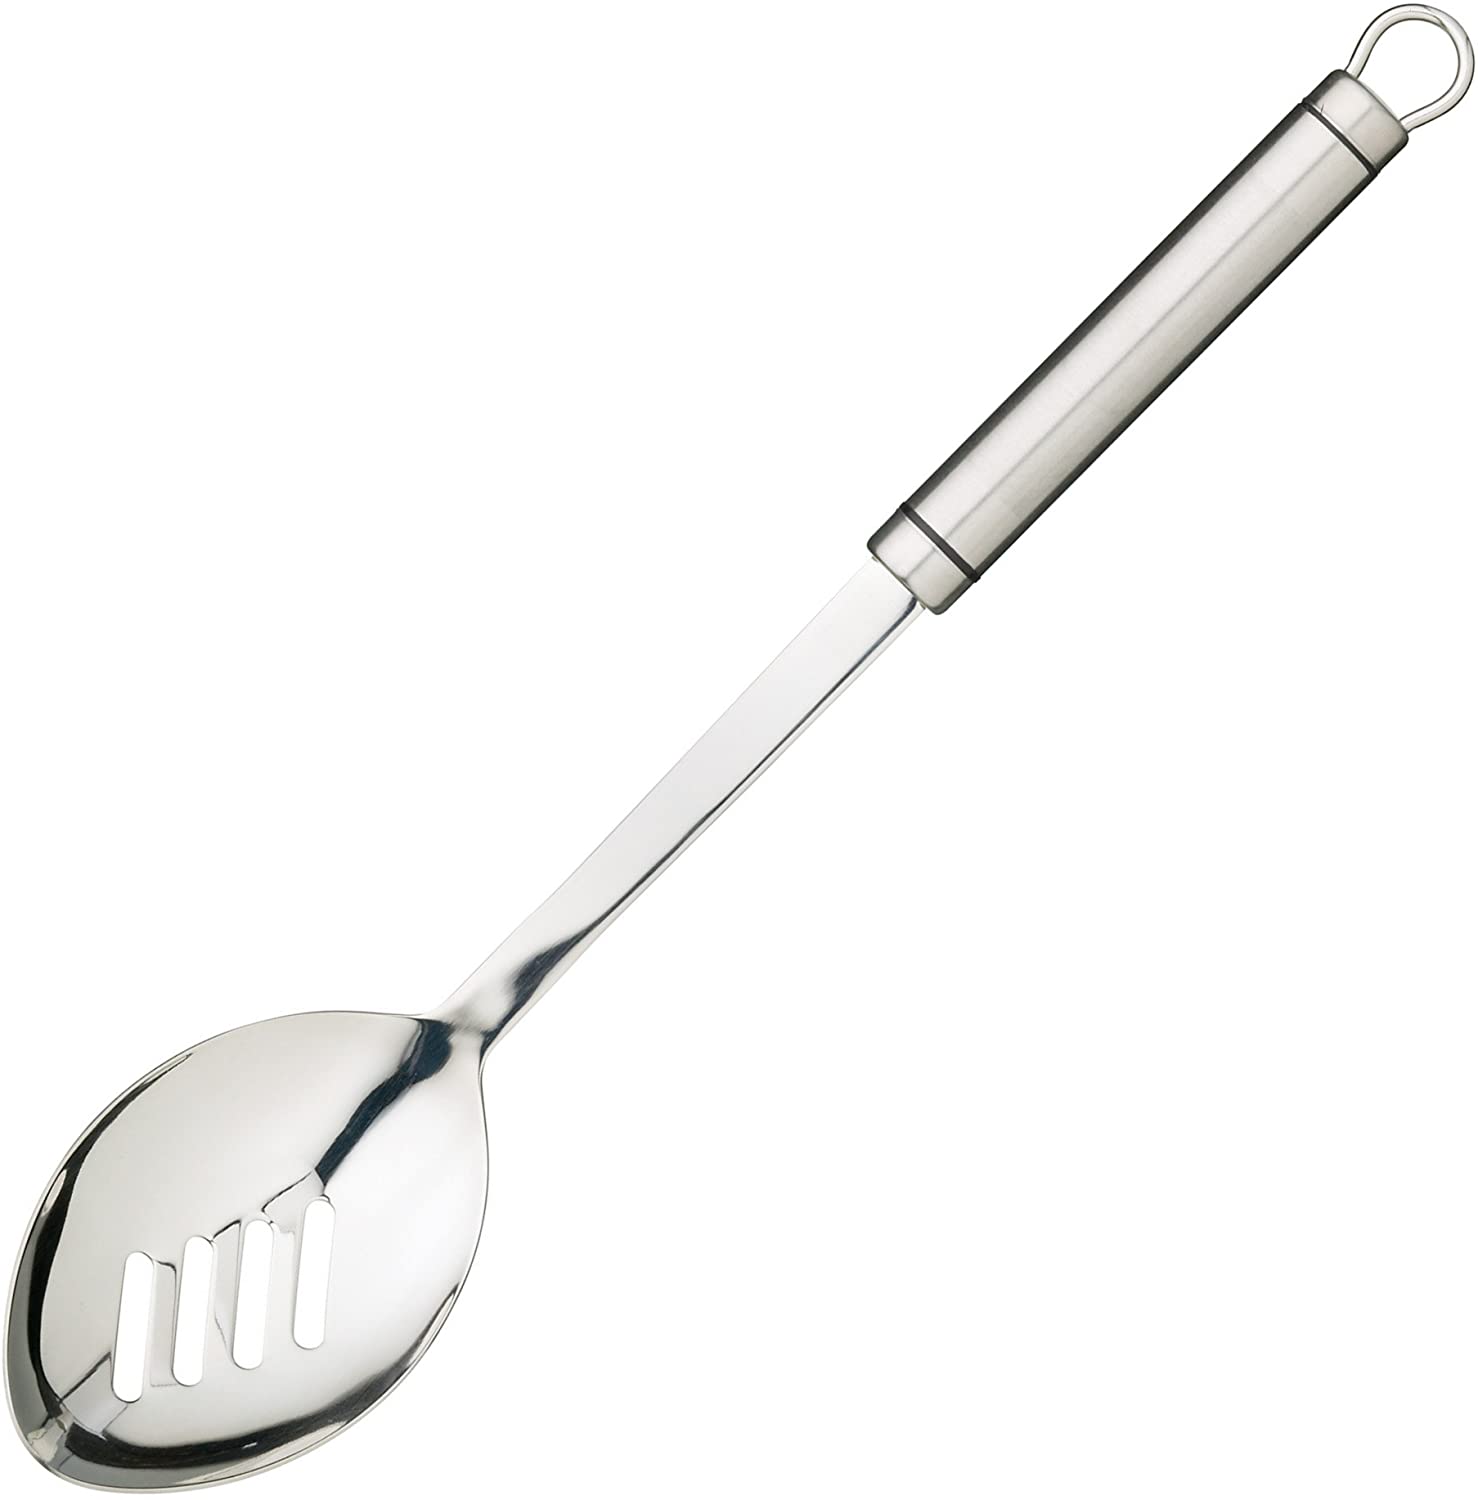 KitchenCraft Kitchen Craft Professional Stainless Steel Long Oval Handled Slotted Spoon